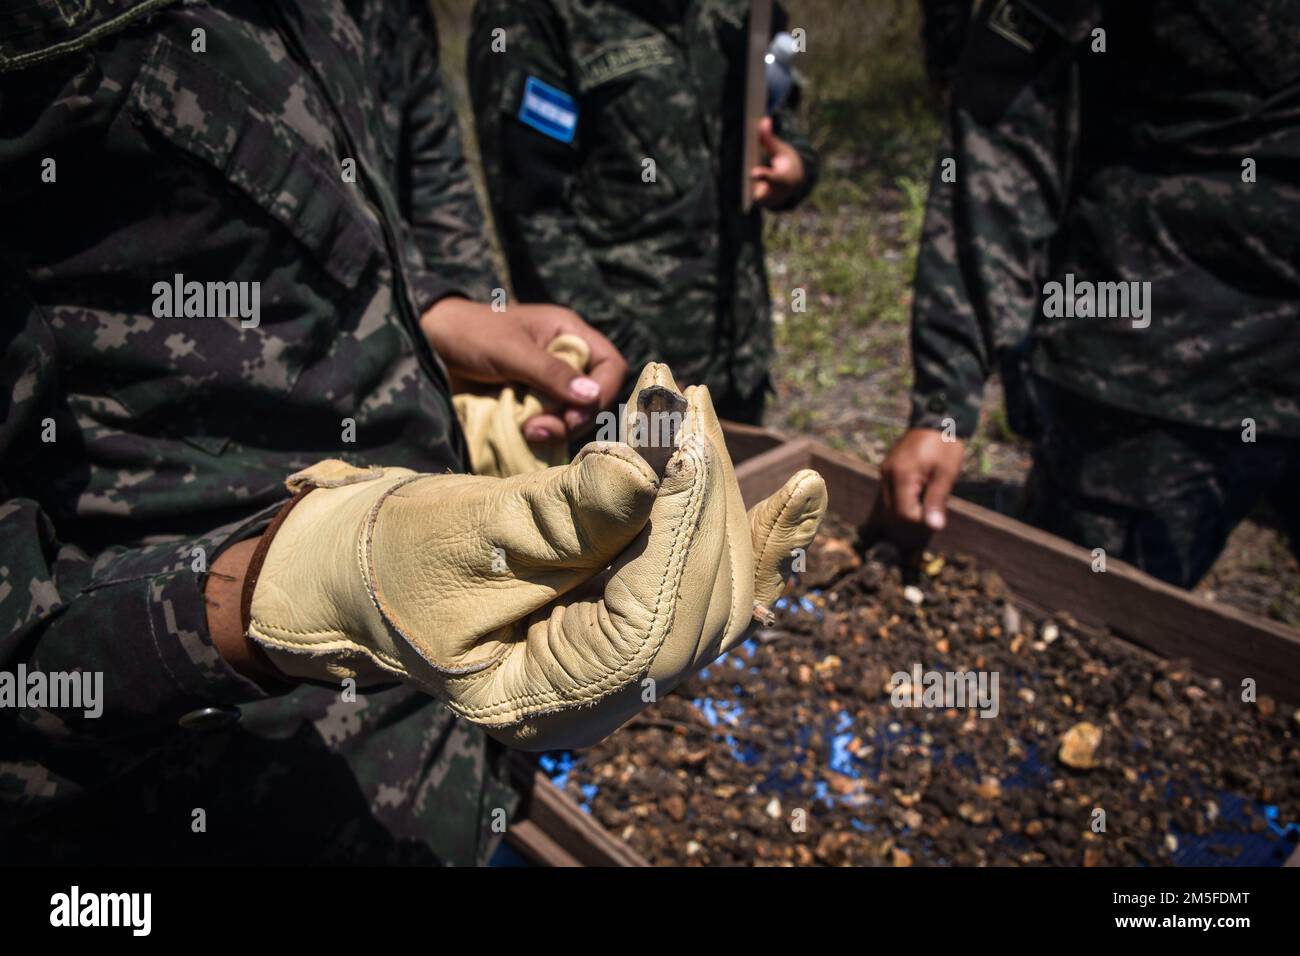 A Honduran soldier with the 120th Infantry Brigade shows a piece of obsidian found during a test pit survey at Las Mesas, Copan, Honduras, March 11, 2022. Joint Task Force-Bravo and the Civil Affairs and Psychological Operations Command partnered with the Honduran Army and Institute of Anthropology to assess cultural heritage sites impacted by natural disasters in Copan, Honduras, March 7-11. Stock Photo